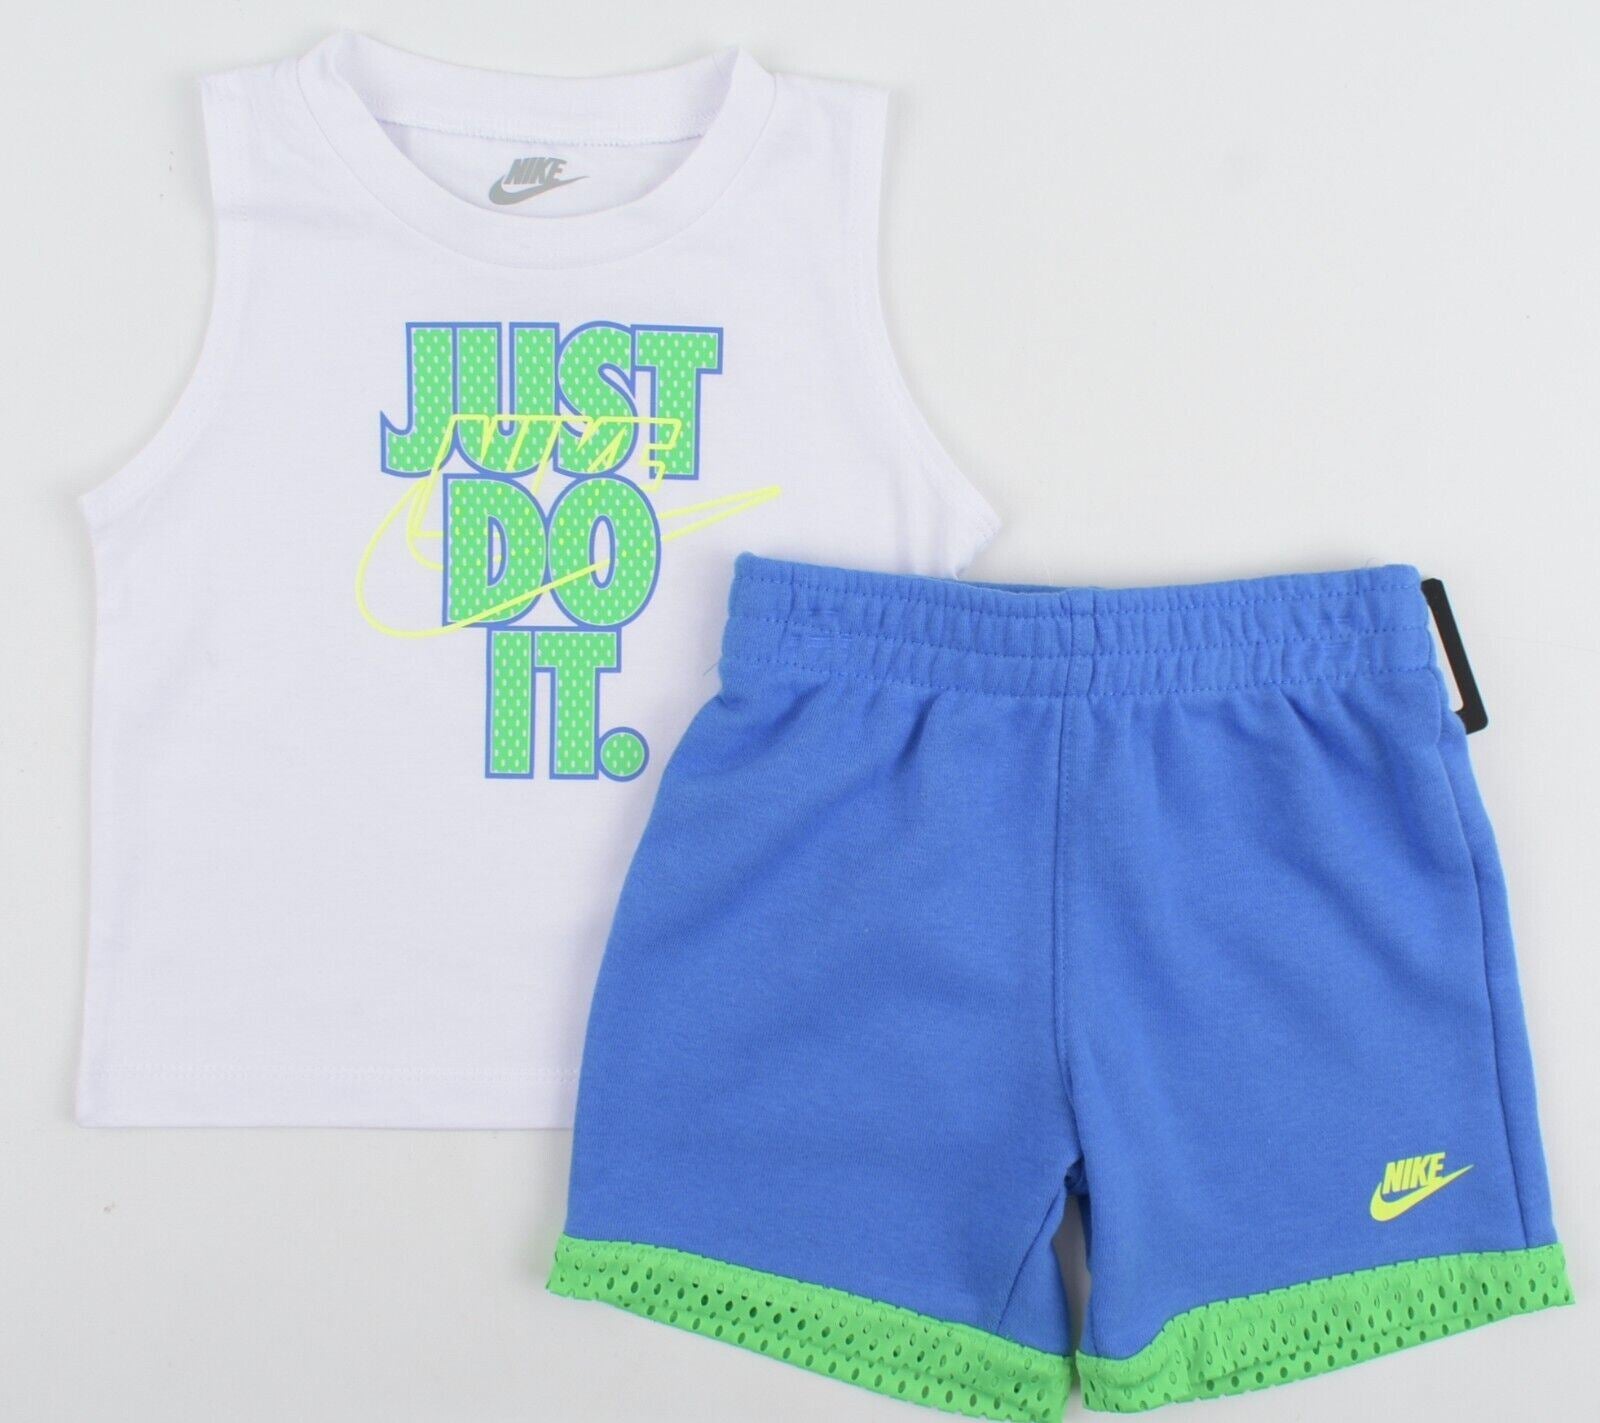 NIKE Baby Boys' 2-pc Summer Outfit Set, Top+Shorts, White/Blue, size 24 months